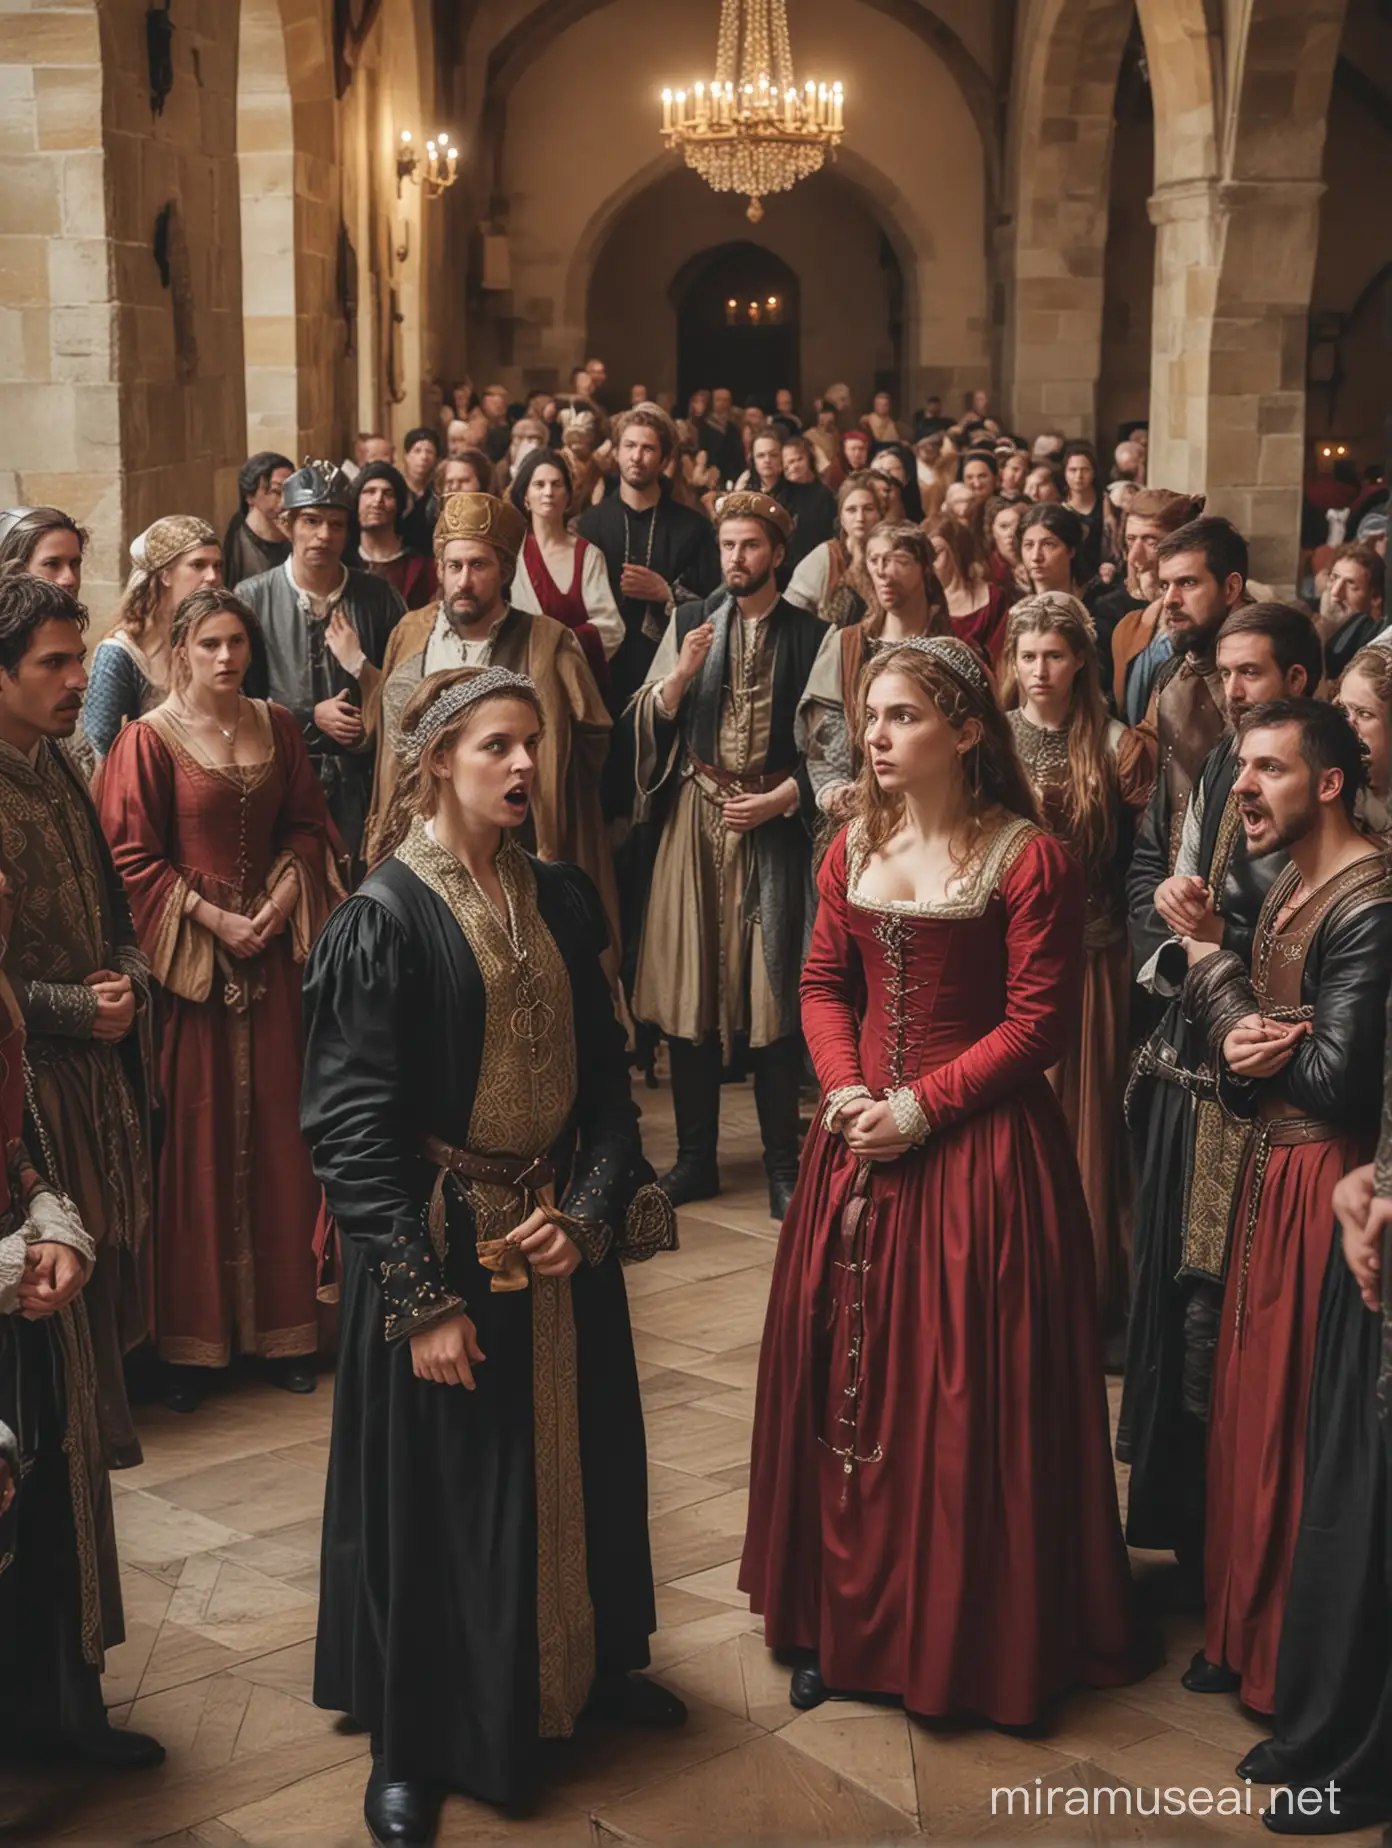 Angry people in medieval attires, gathered at a ball room